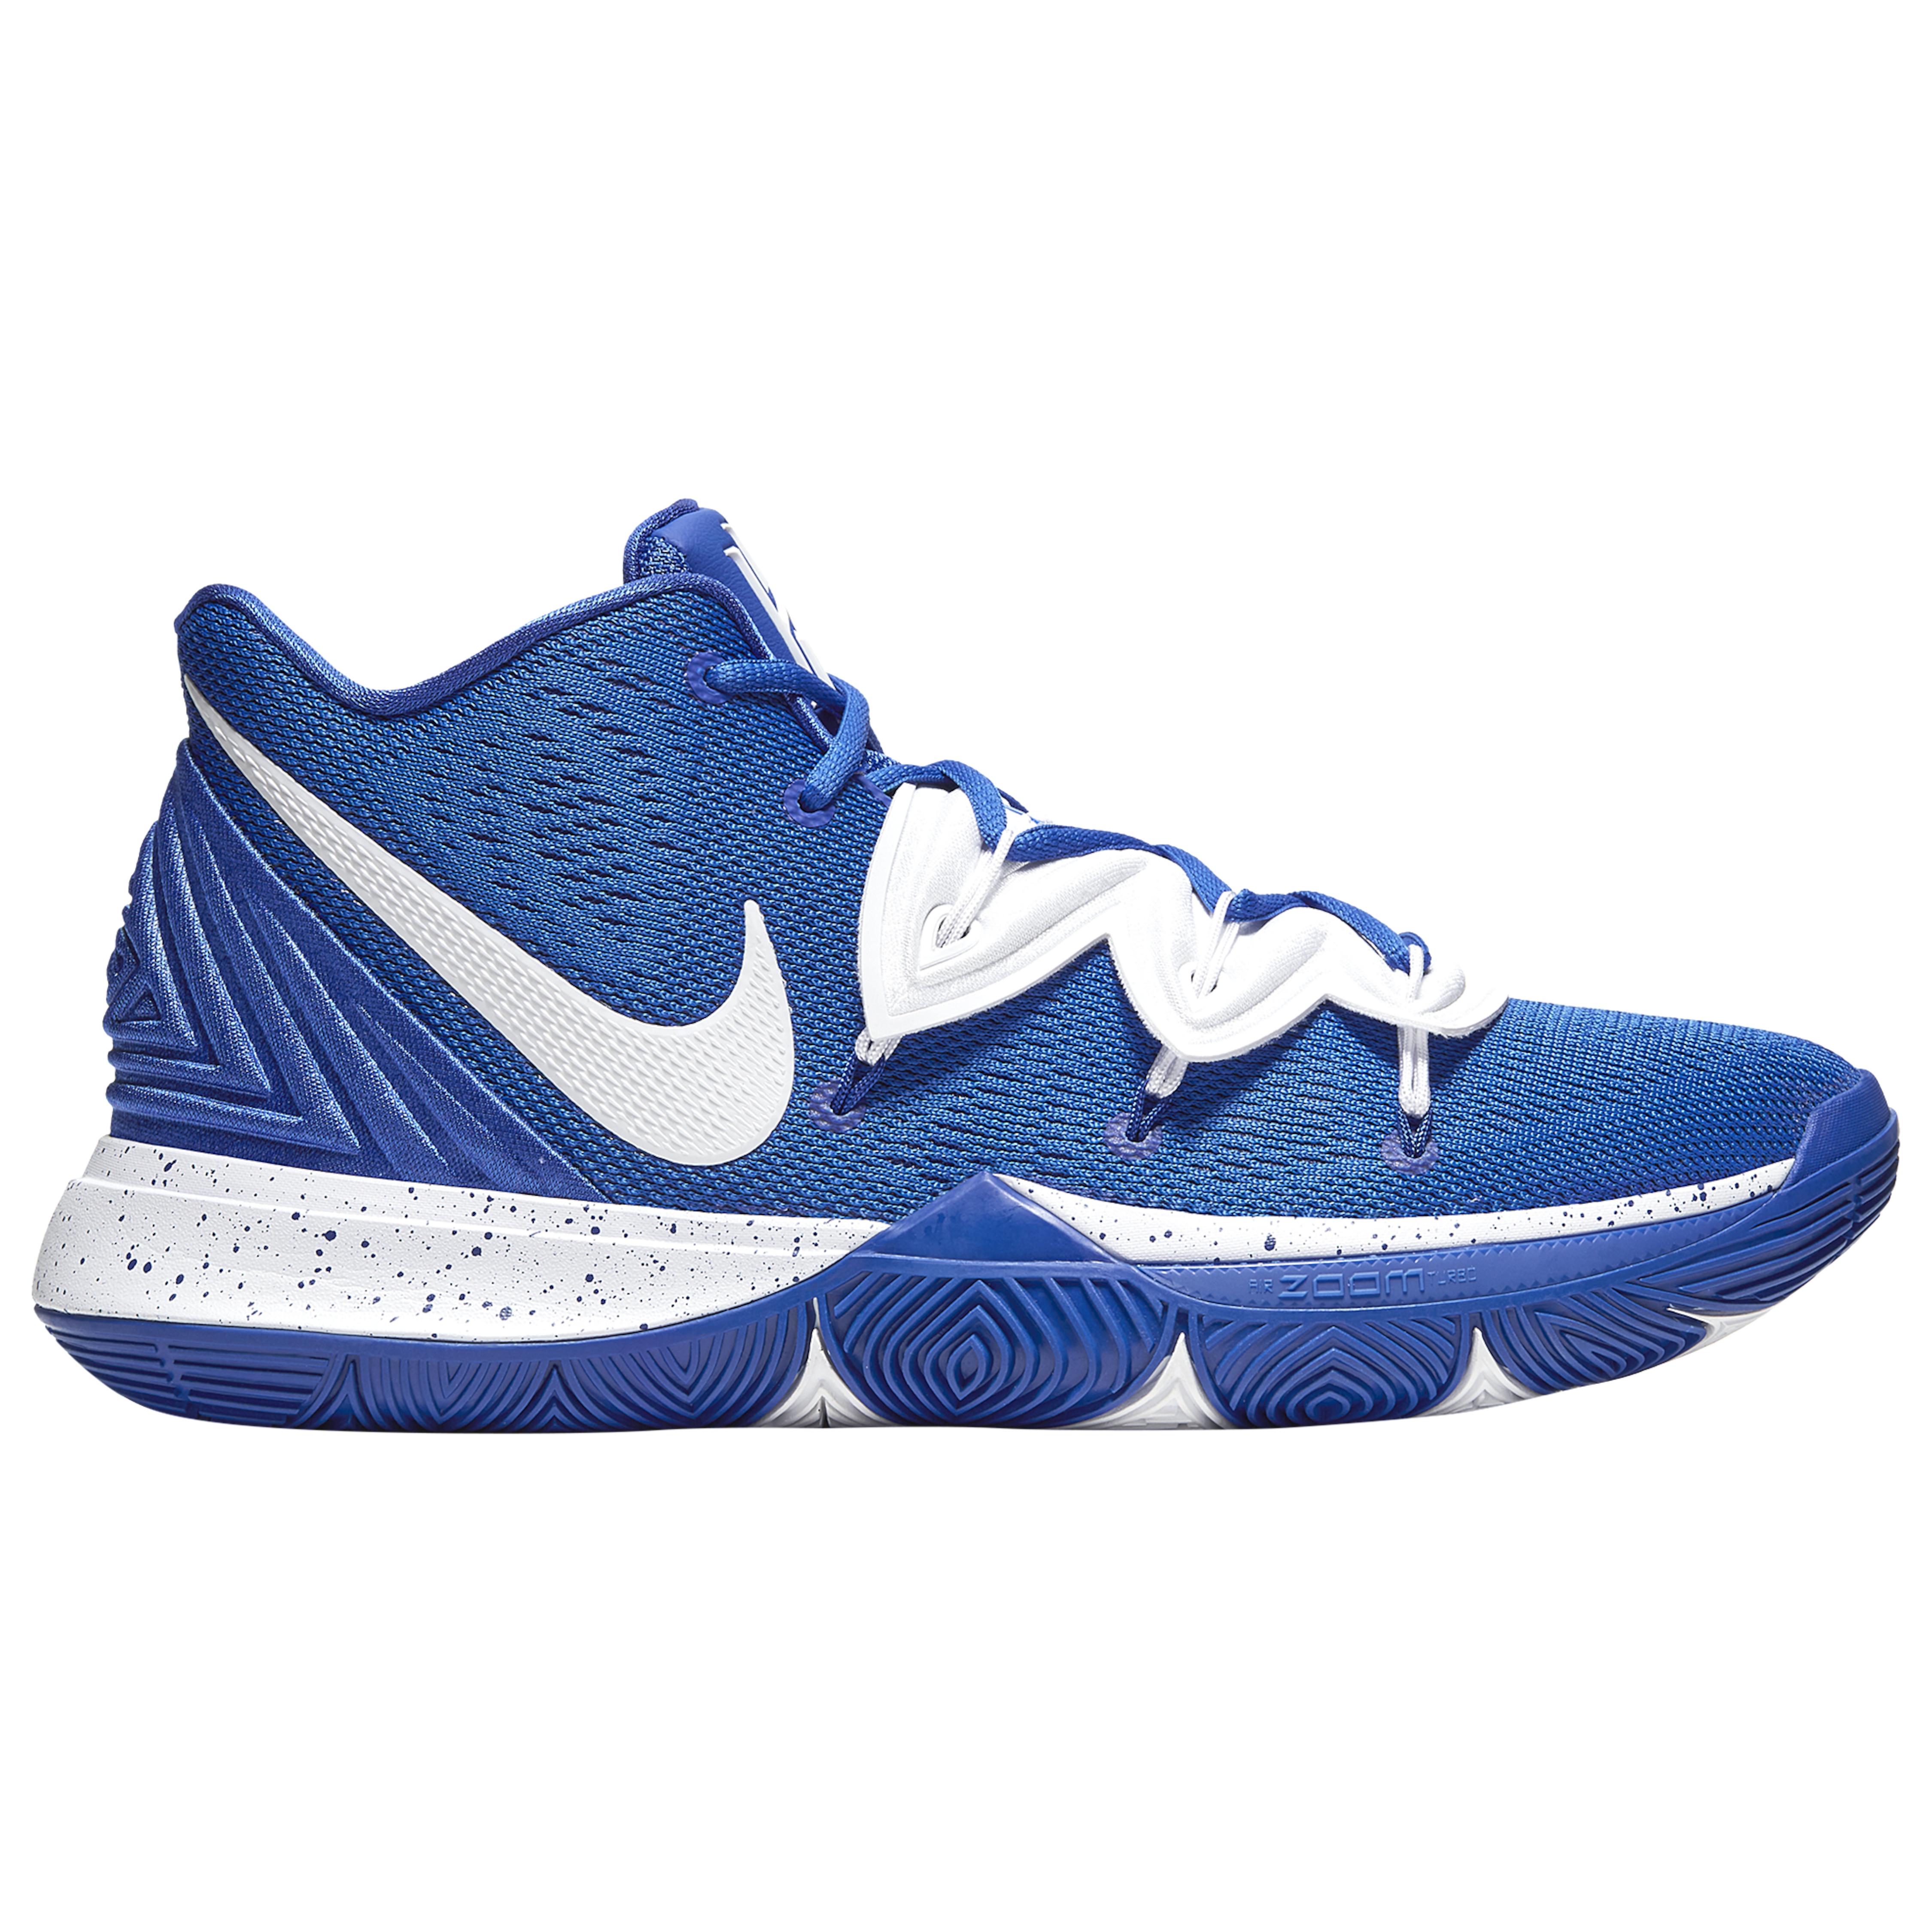 white and blue kyrie 5